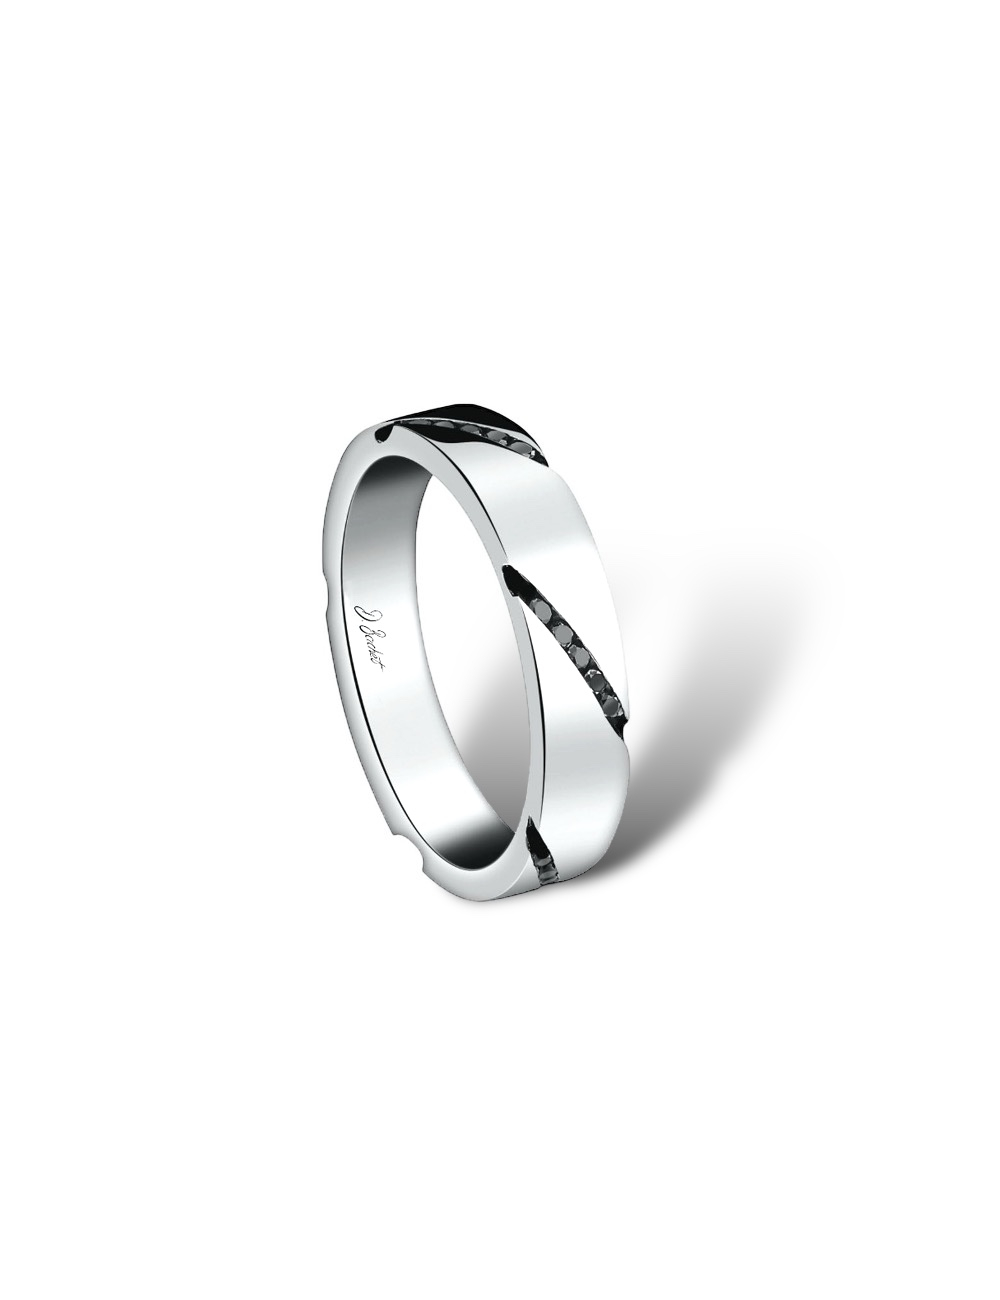 Men's platinum wedding band with a modern design, set with inclined rows of black diamonds.